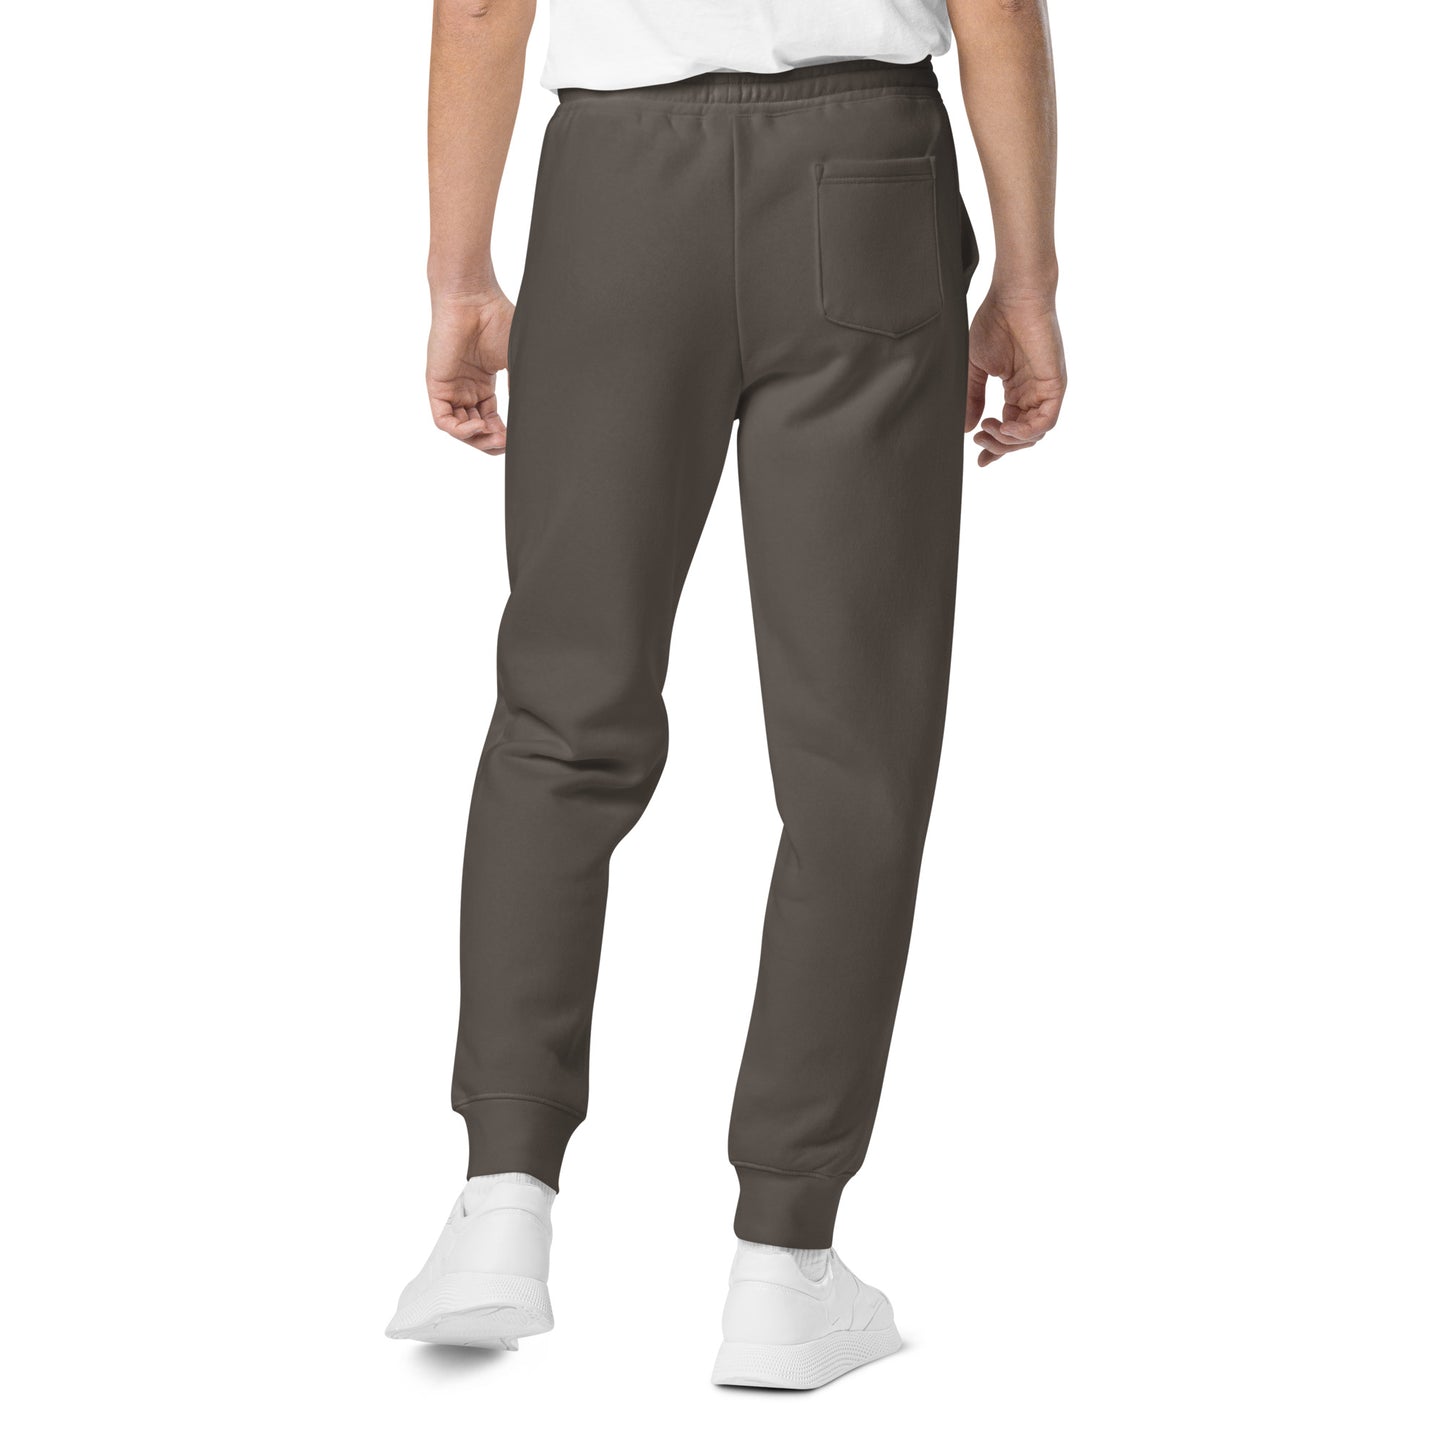 Unchained Lifestyle sweatpants